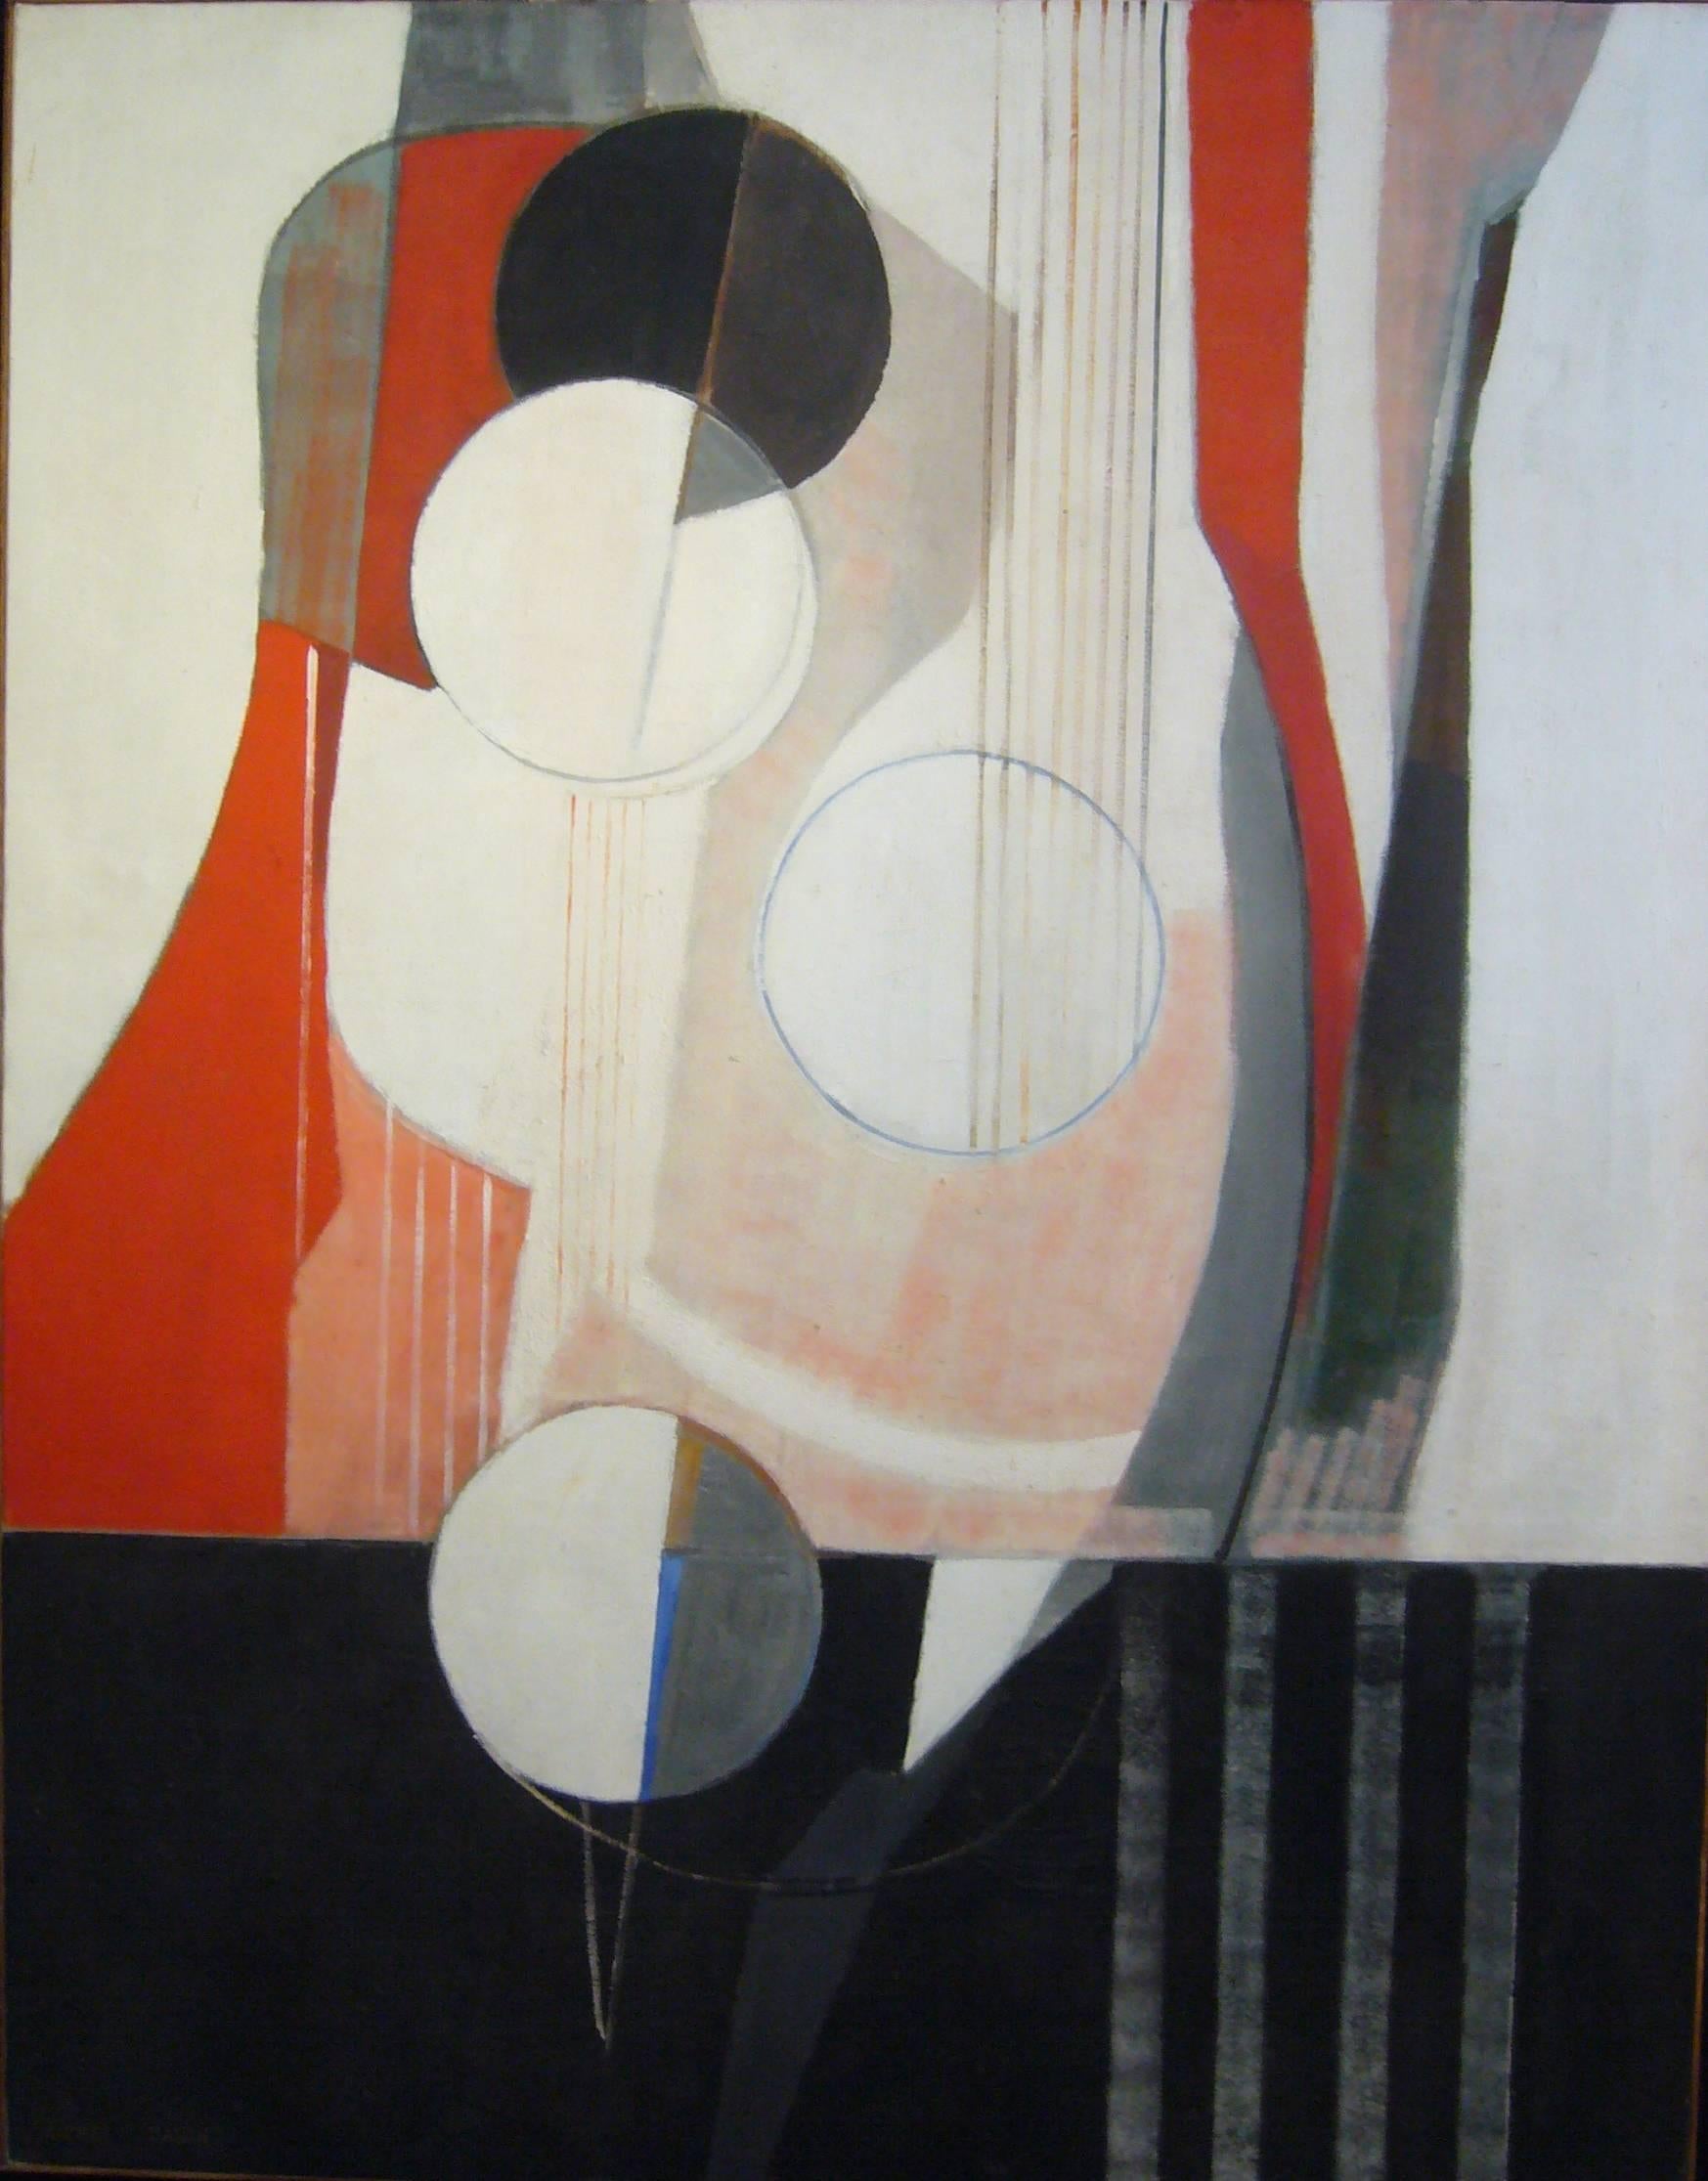 Michel Gaudet Abstract Painting - TRIPTYQUE DU CERCLE III , 1972- Oil on canvas, 147x115 cm.